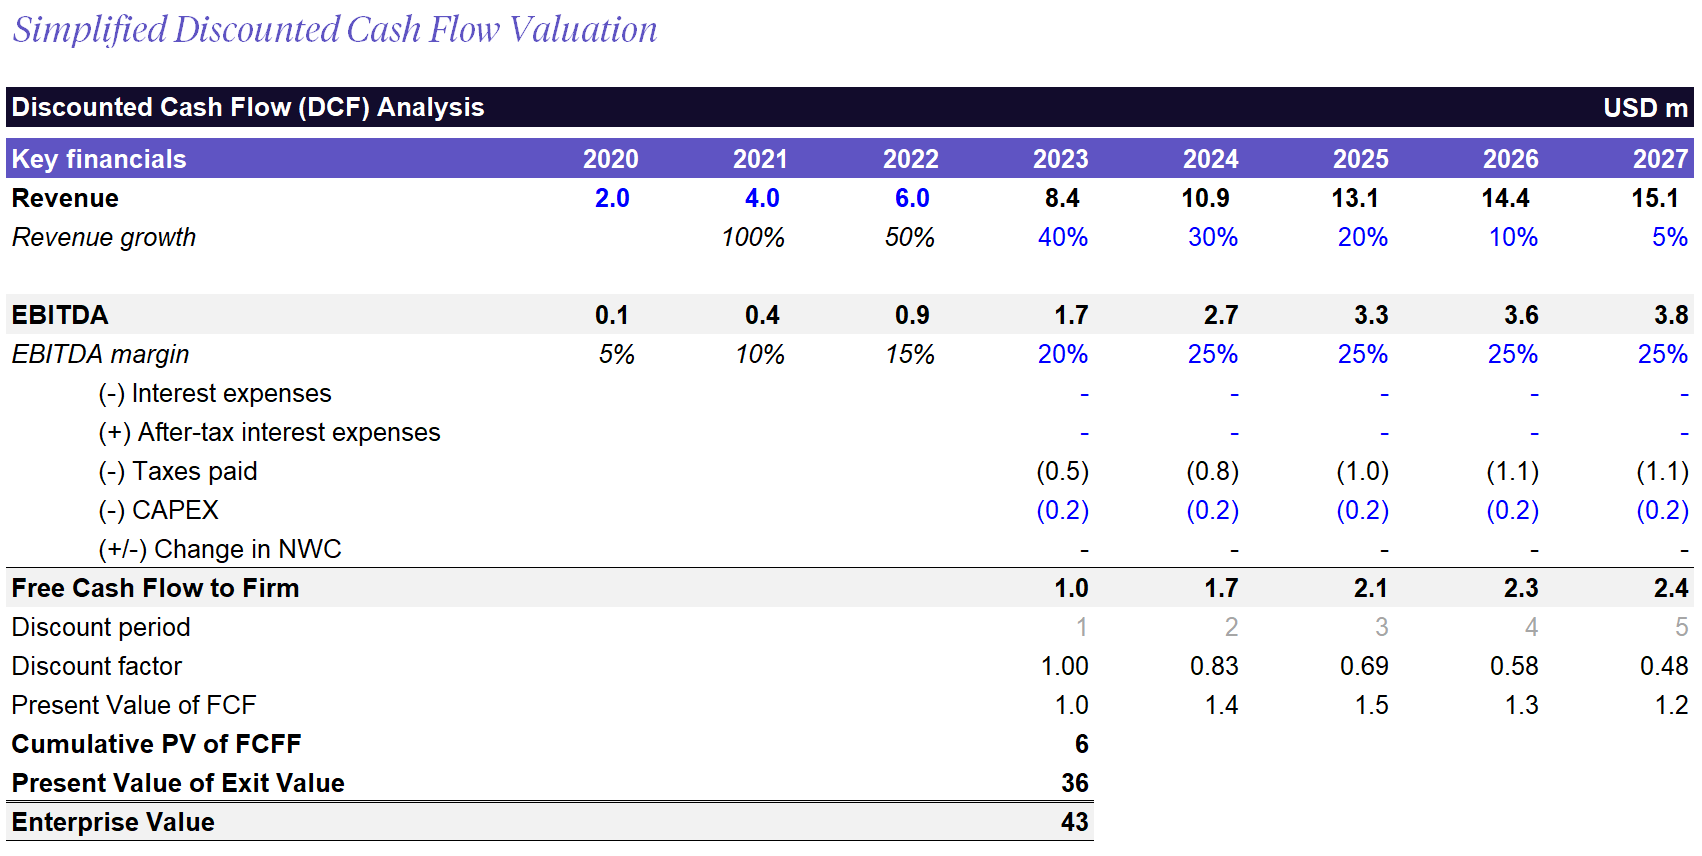 Simplified DCF valuation for a tech company